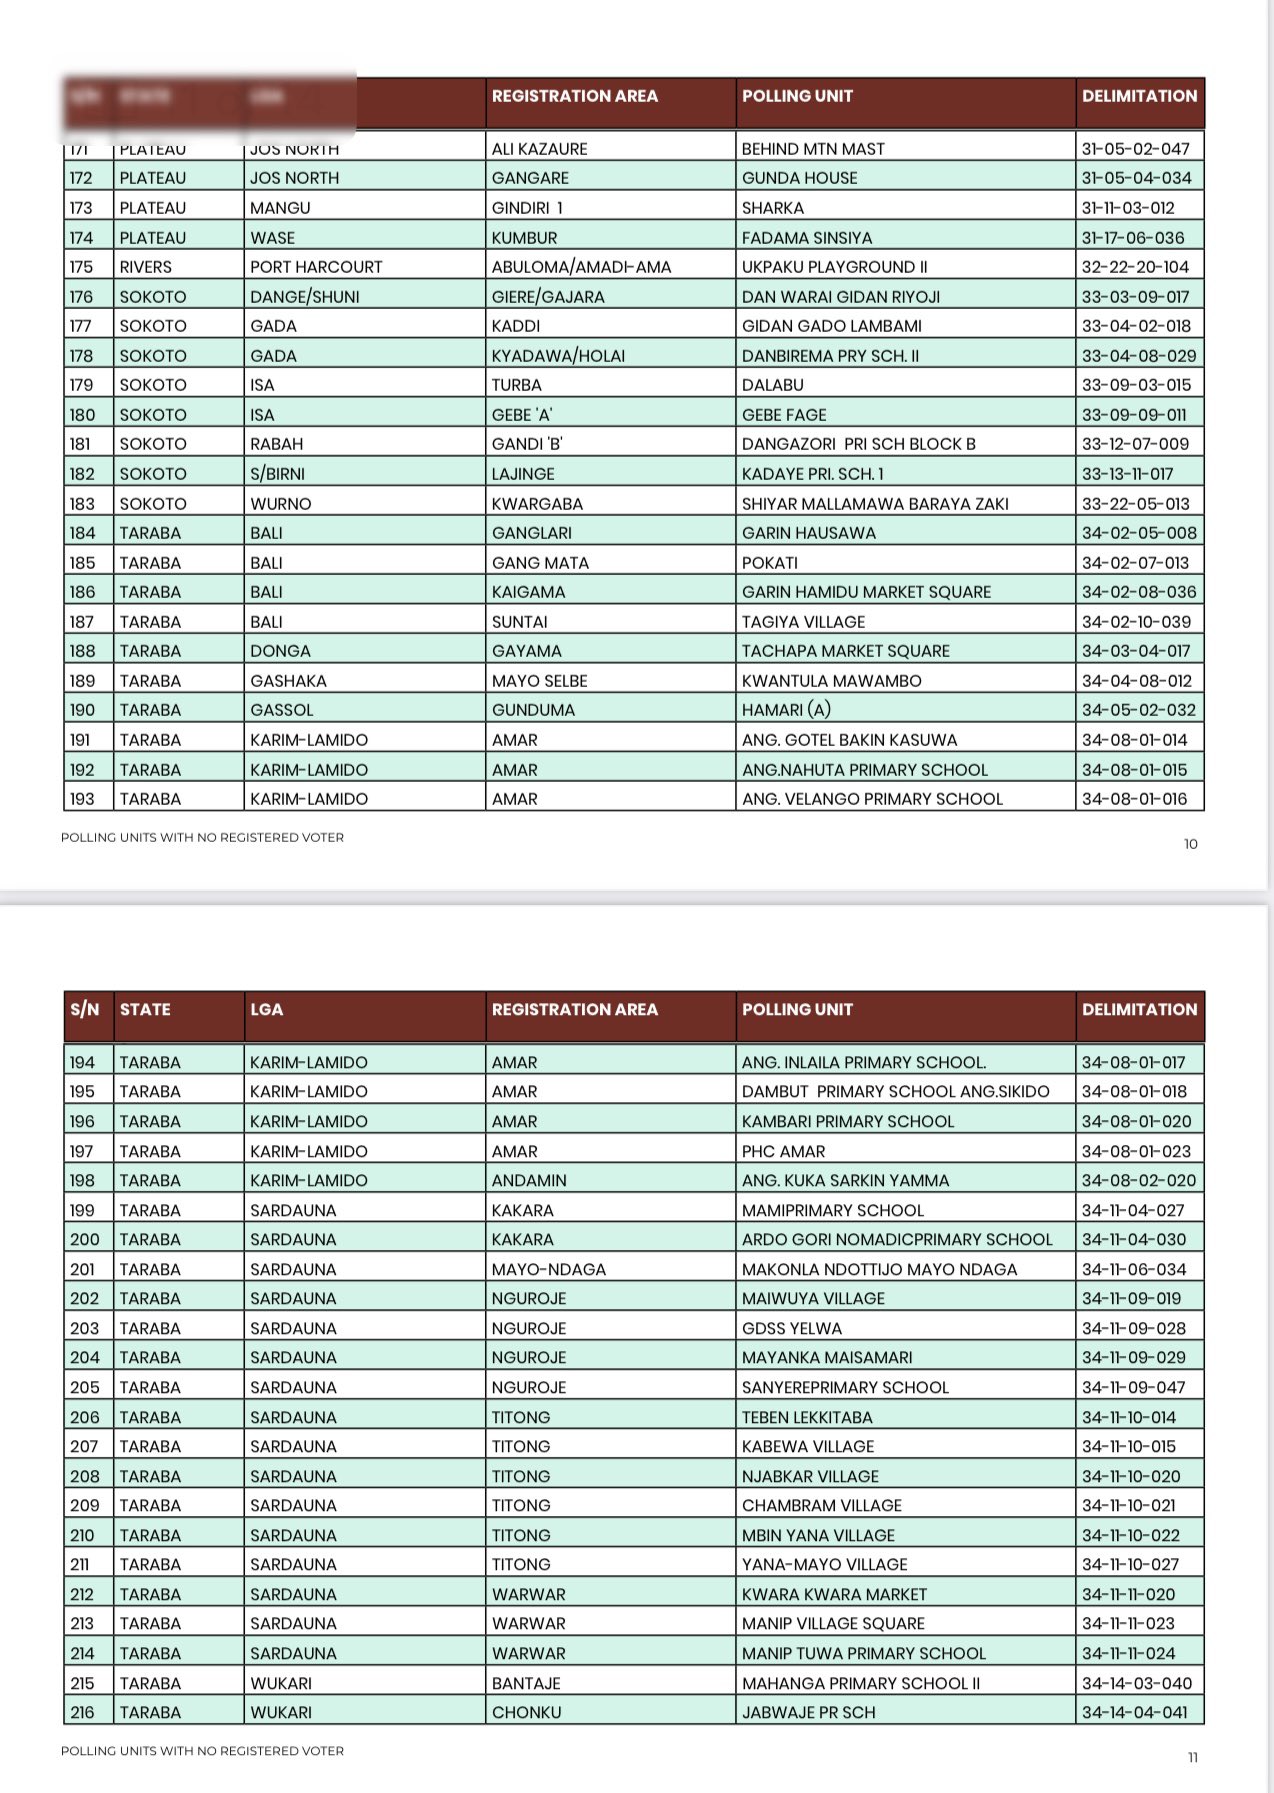 INEC's list of polling units with no registered voters